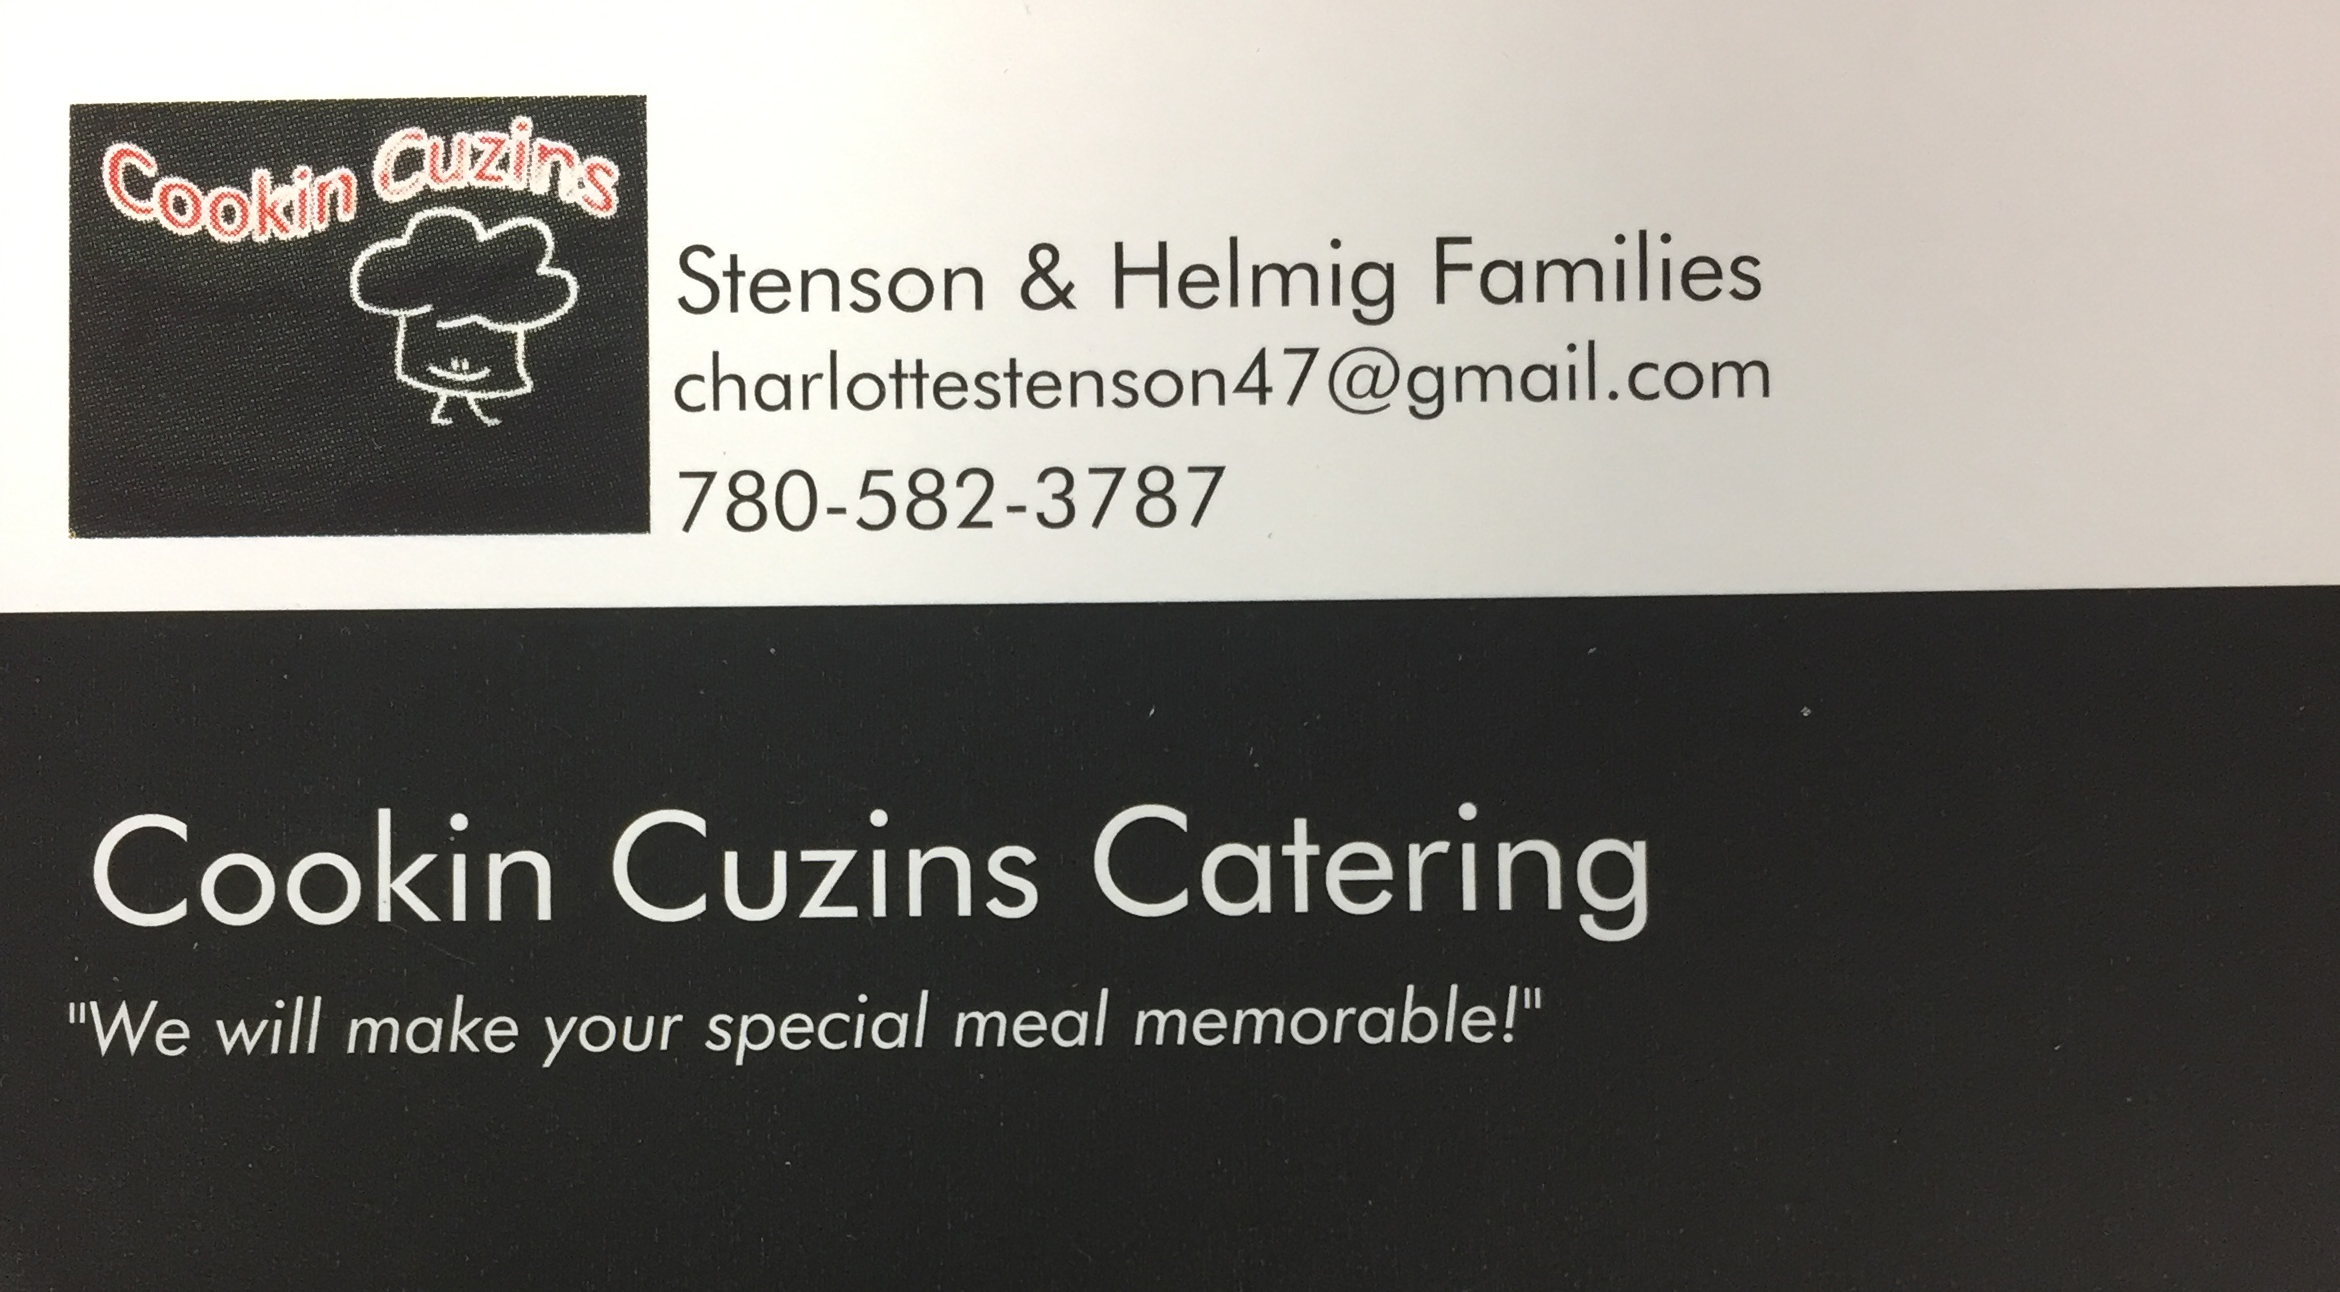 Cookin Cuzins Catering